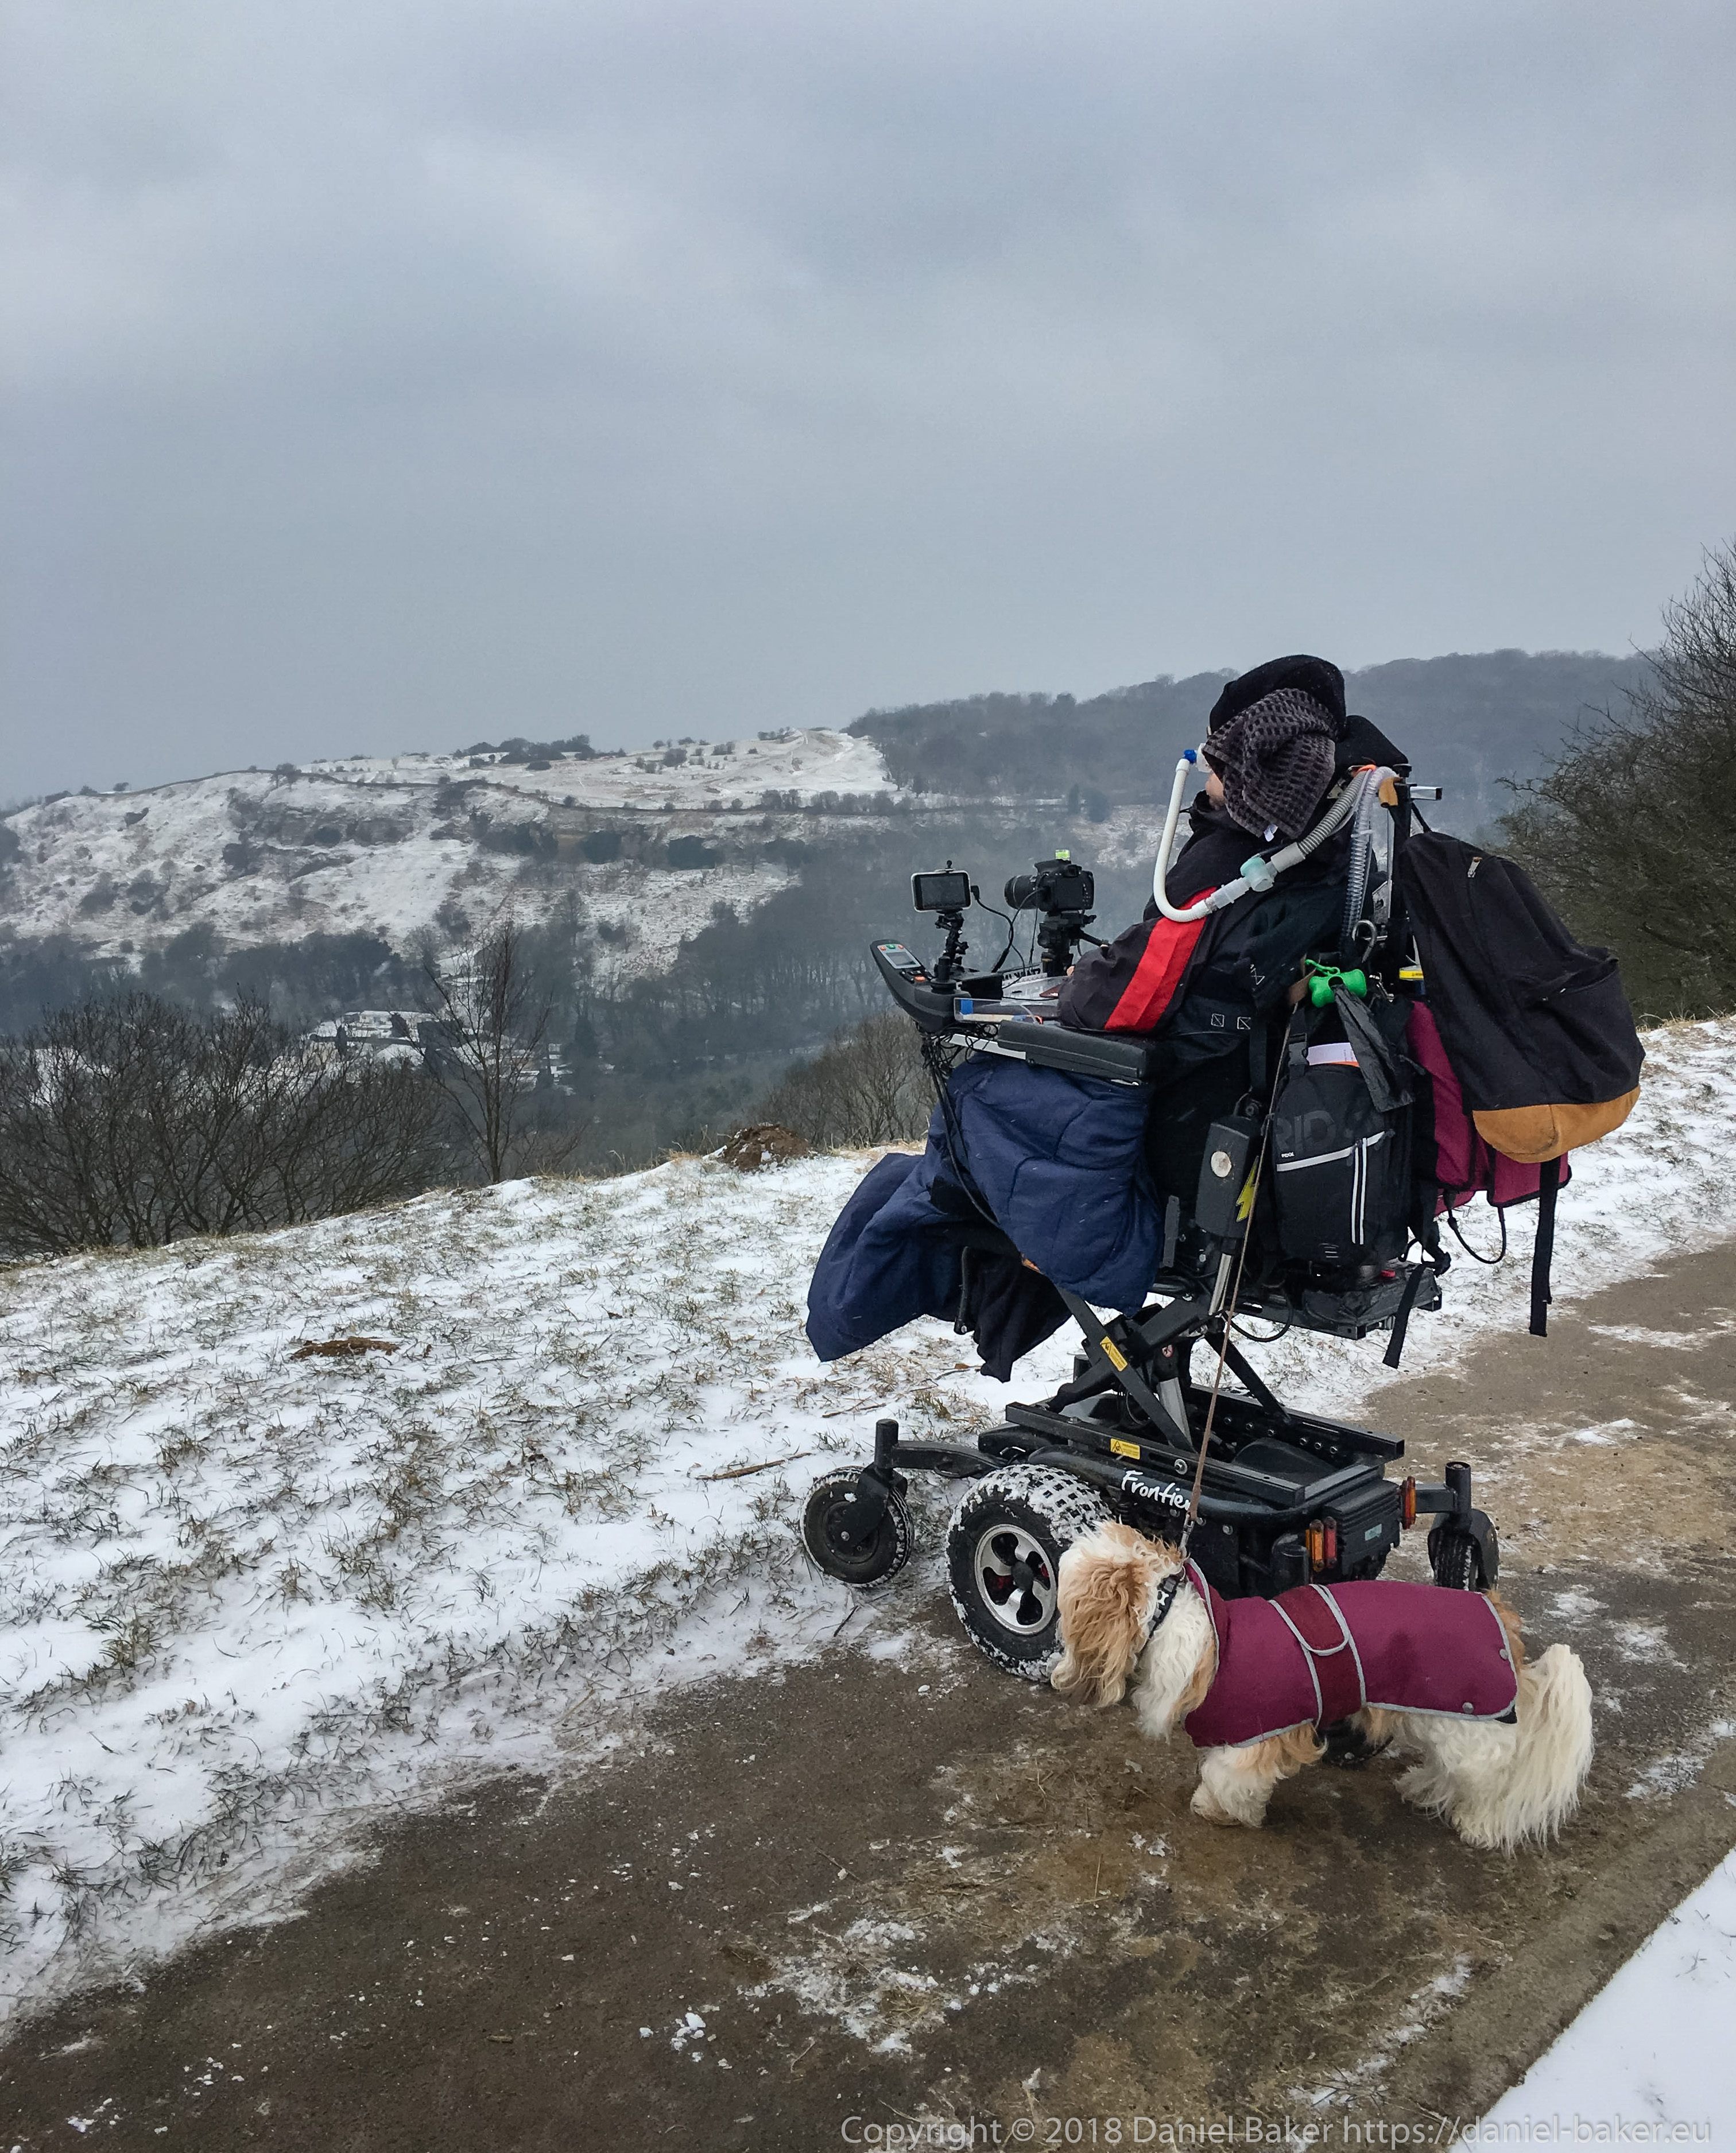 Daniel Baker looking down over Cheltenham from Birdlip hill in the snow, attached to his wheelchair is his faithful dog Mya